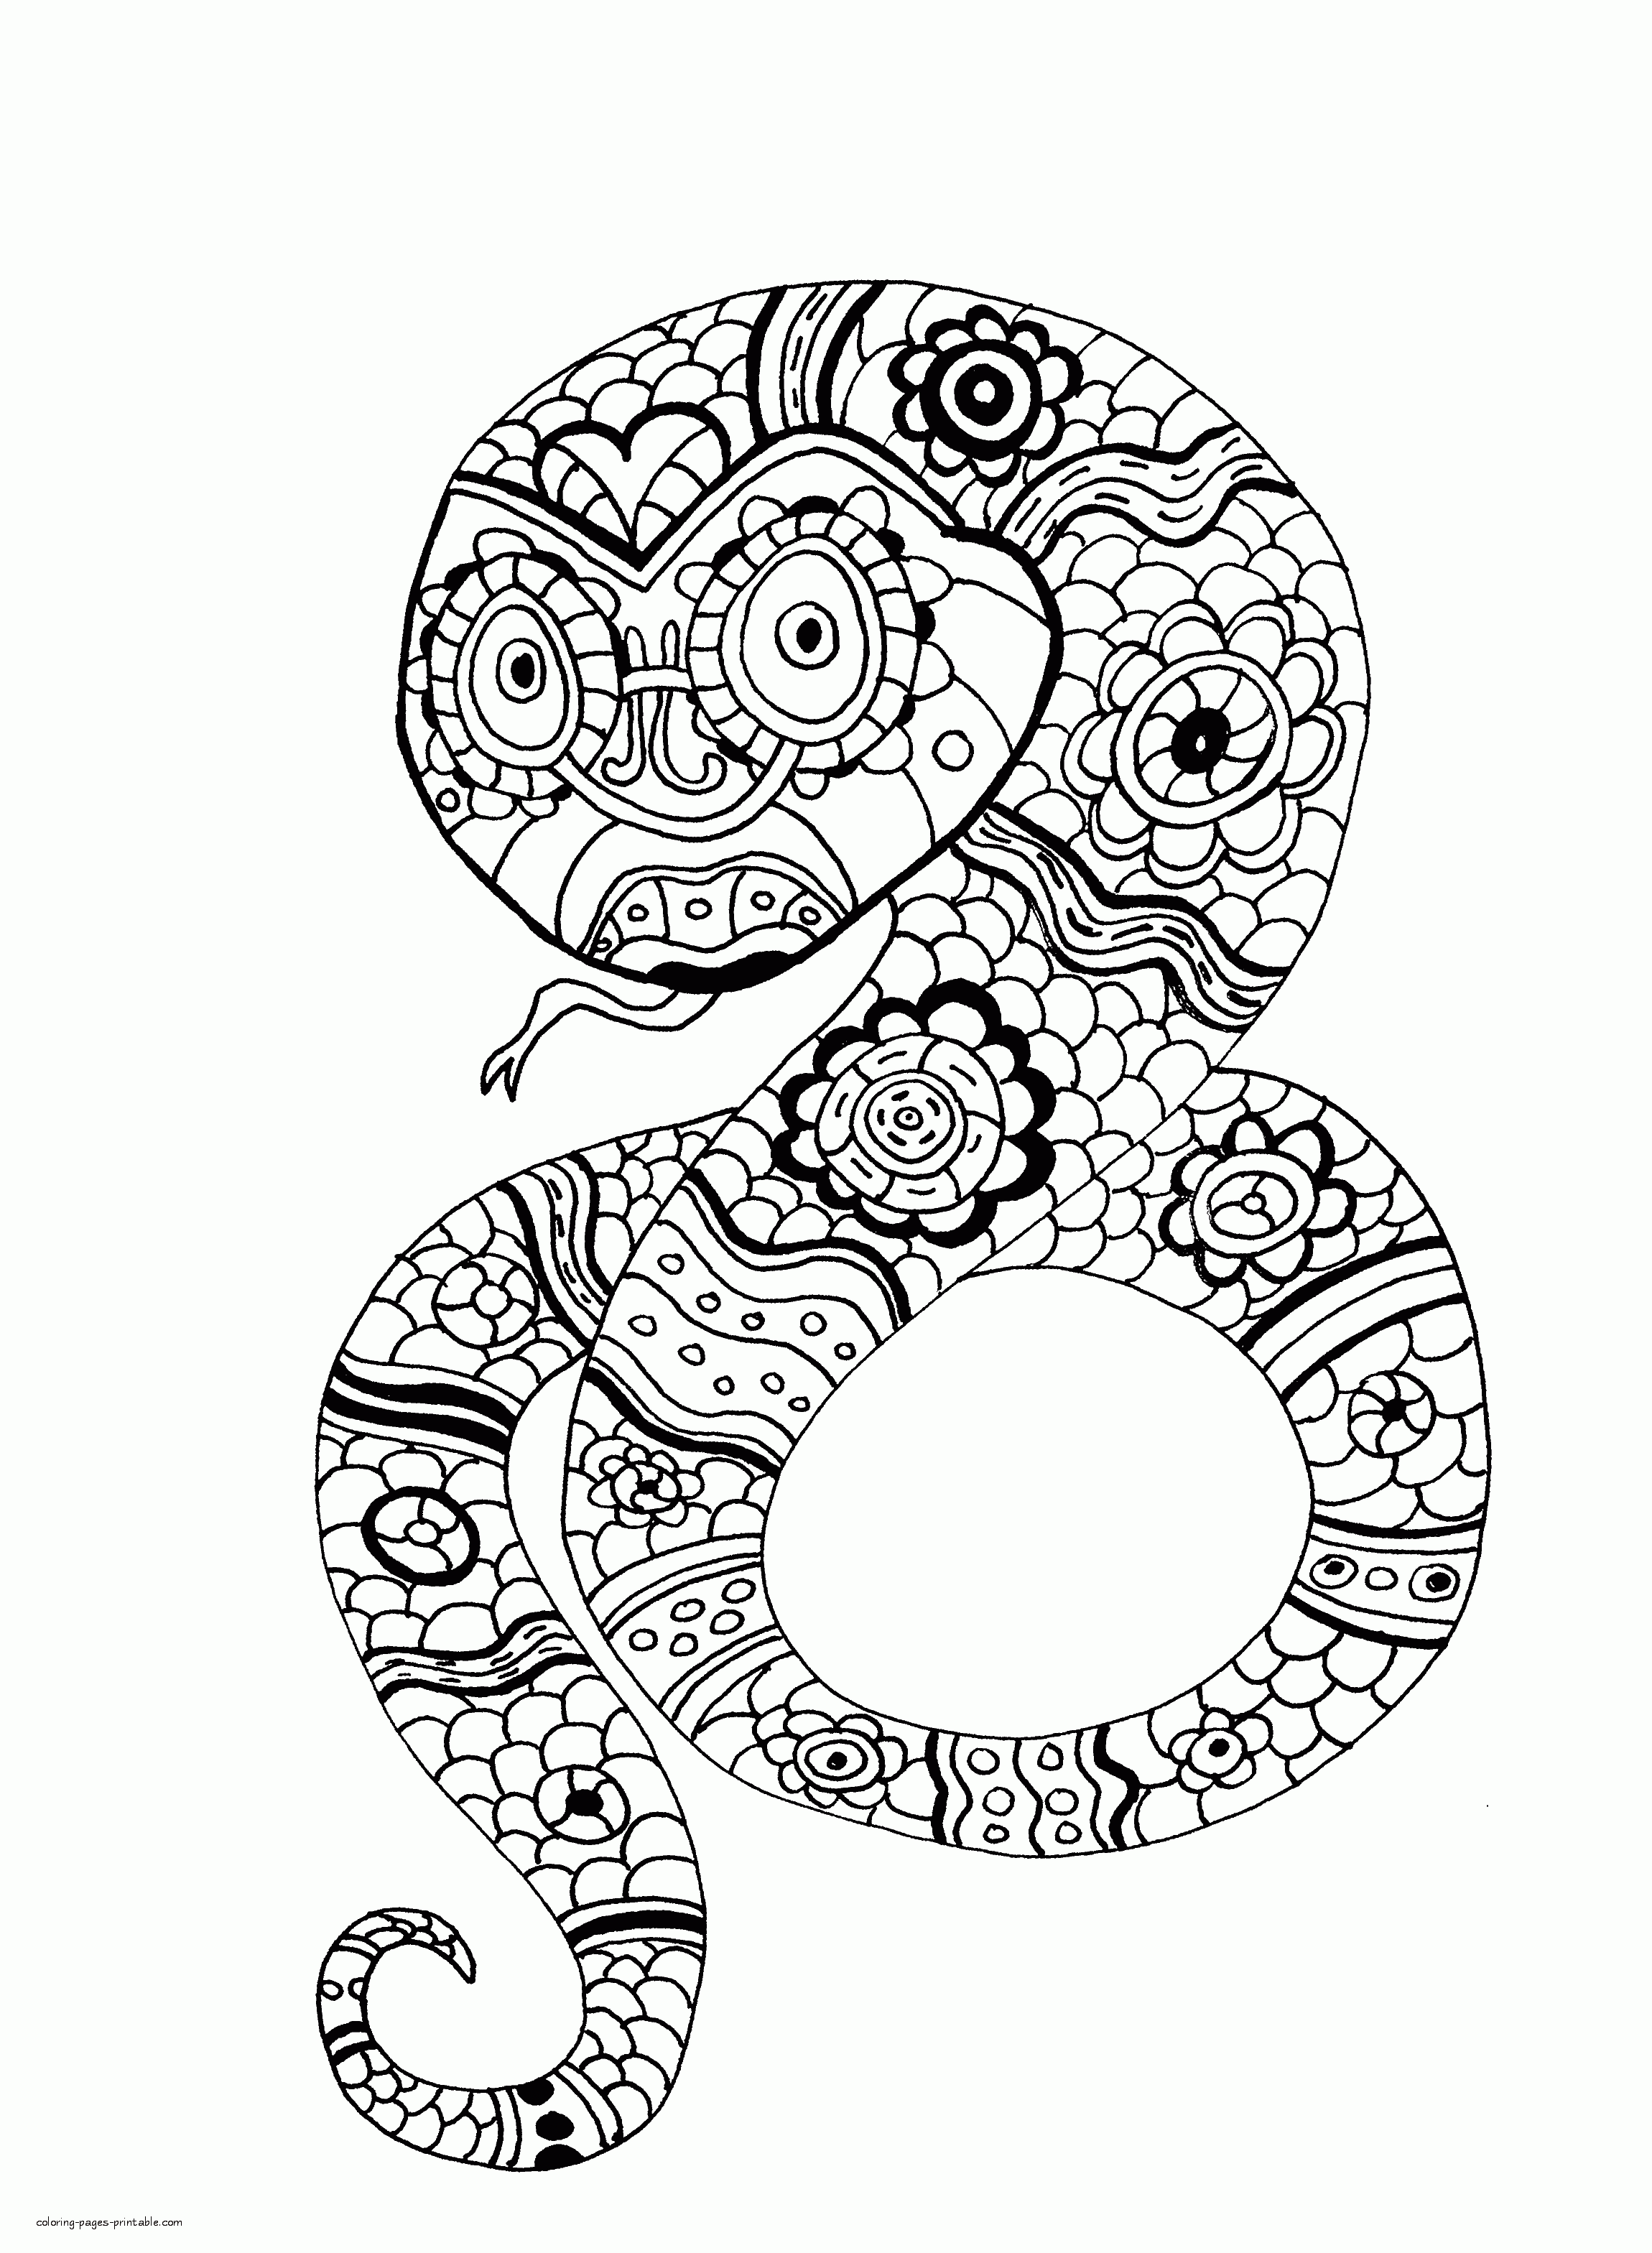 Snake Coloring | Coloringnori - Coloring Pages for Kids